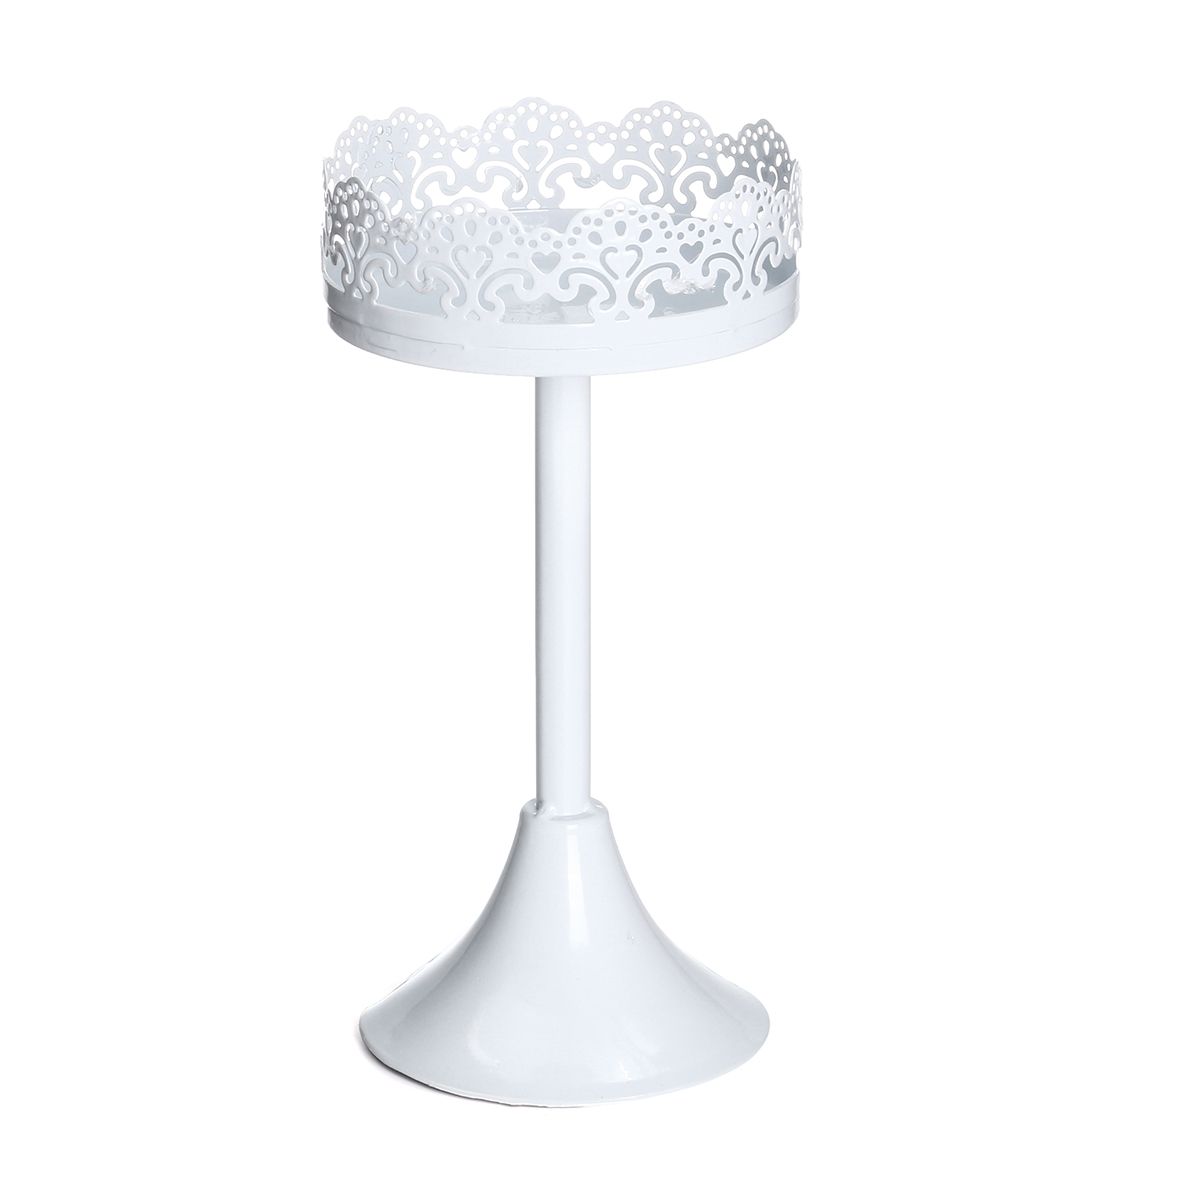 12pcsSet-Classical-European-style-Crystal-White-Metal-Cake-Cup-Holder-Cupcake-Stand-Wedding-Display-1525188